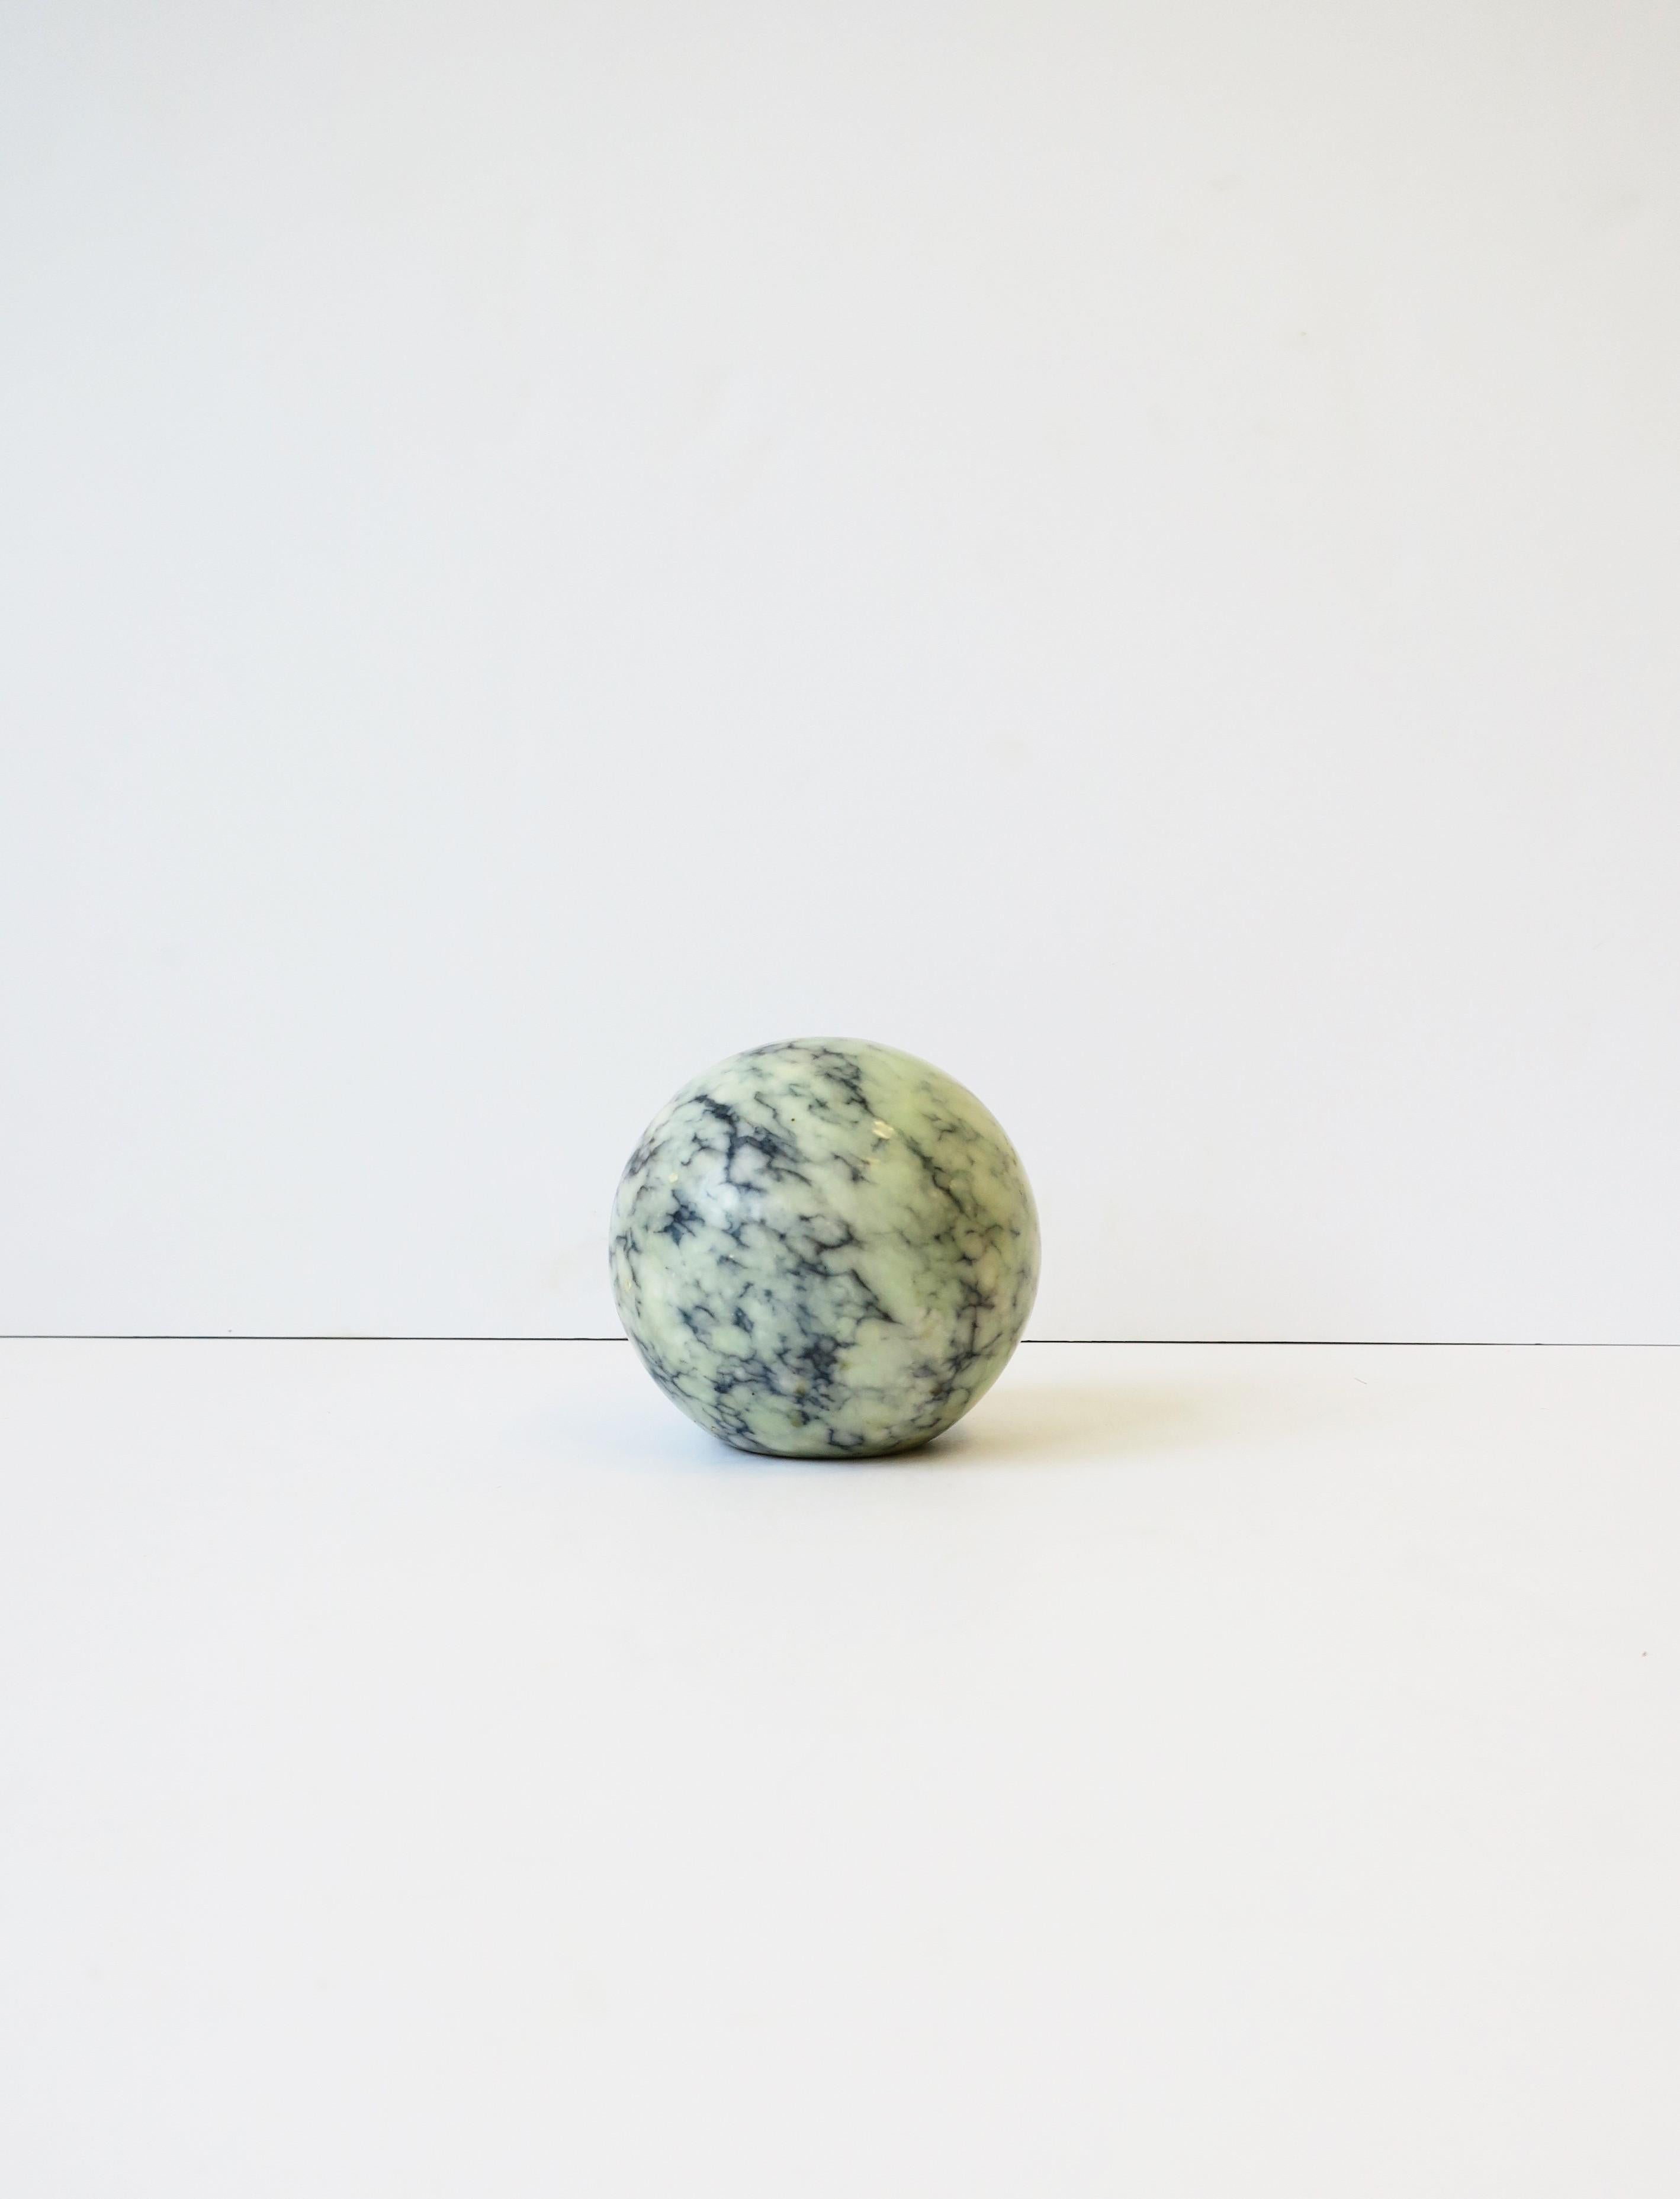 A substantial modern or Post-Modern marble round ball sphere in a light blue marble with dark blue veining, Italy, circa late-20th century, 1970s. A great decorative object as shown in images. Dimensions: 3.5